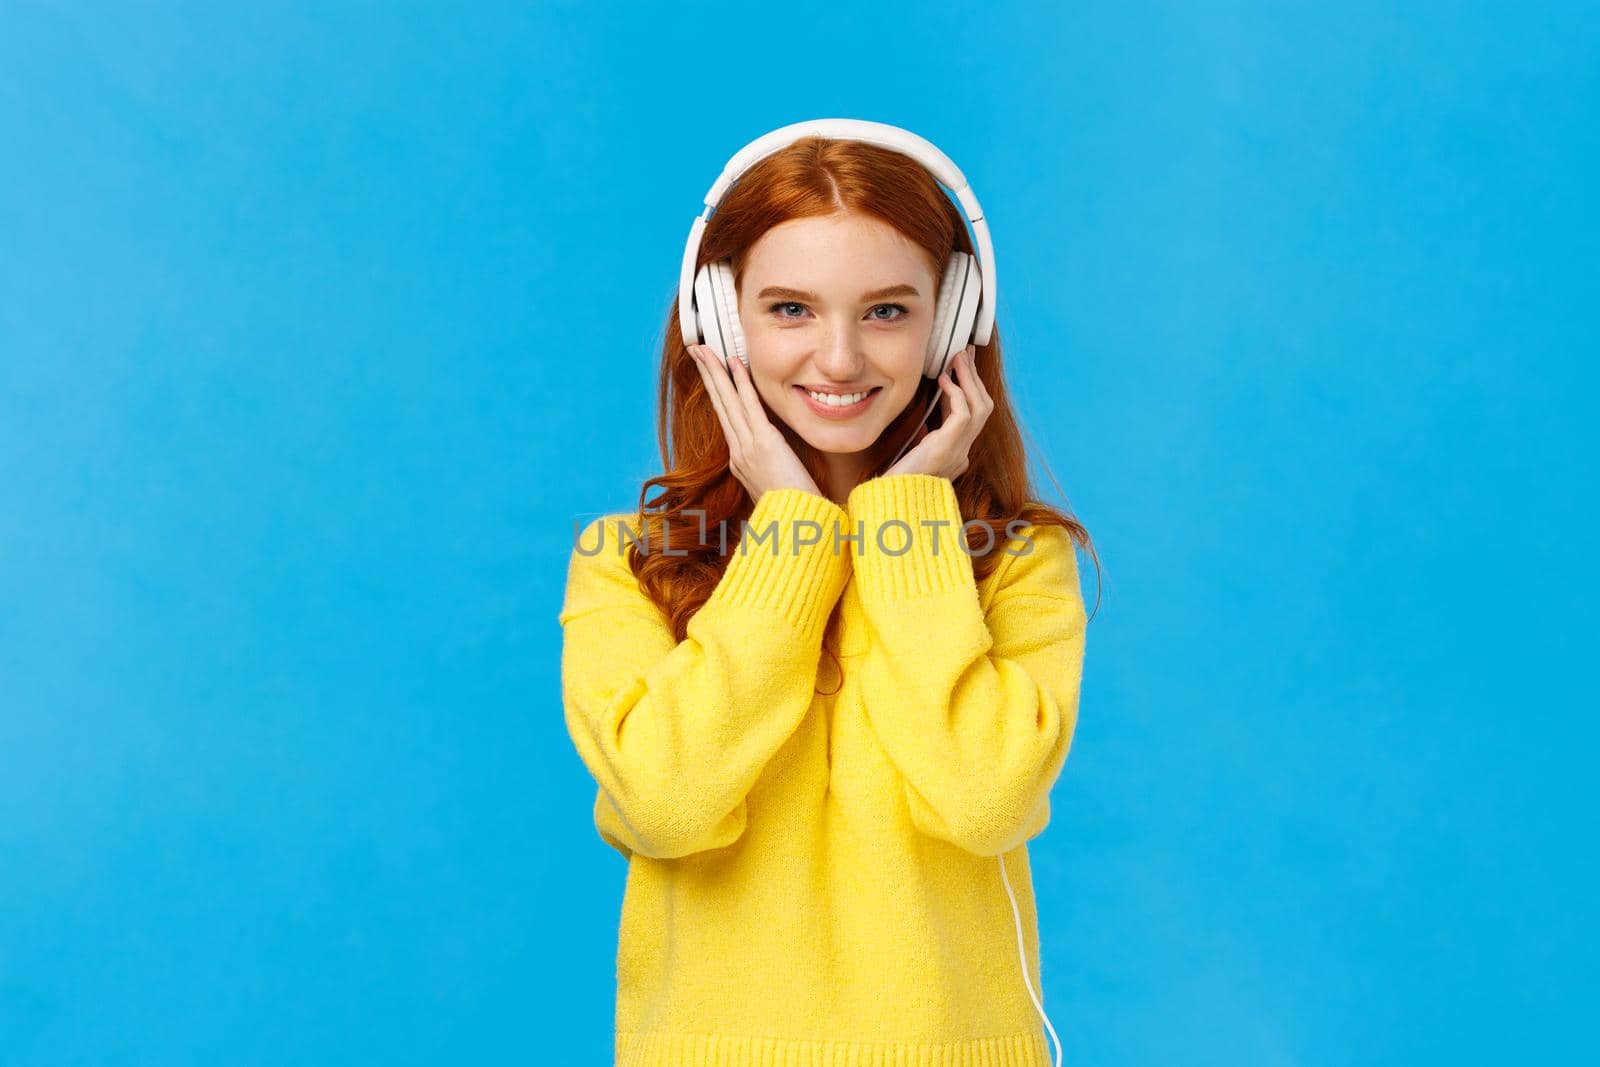 Waist-up shot sassy good-looking redhead, ginger girl with blue eyes and freckles in soft yellow sweater, listen music headphones, press earphones to ears, smiling hear new song favorite singer.